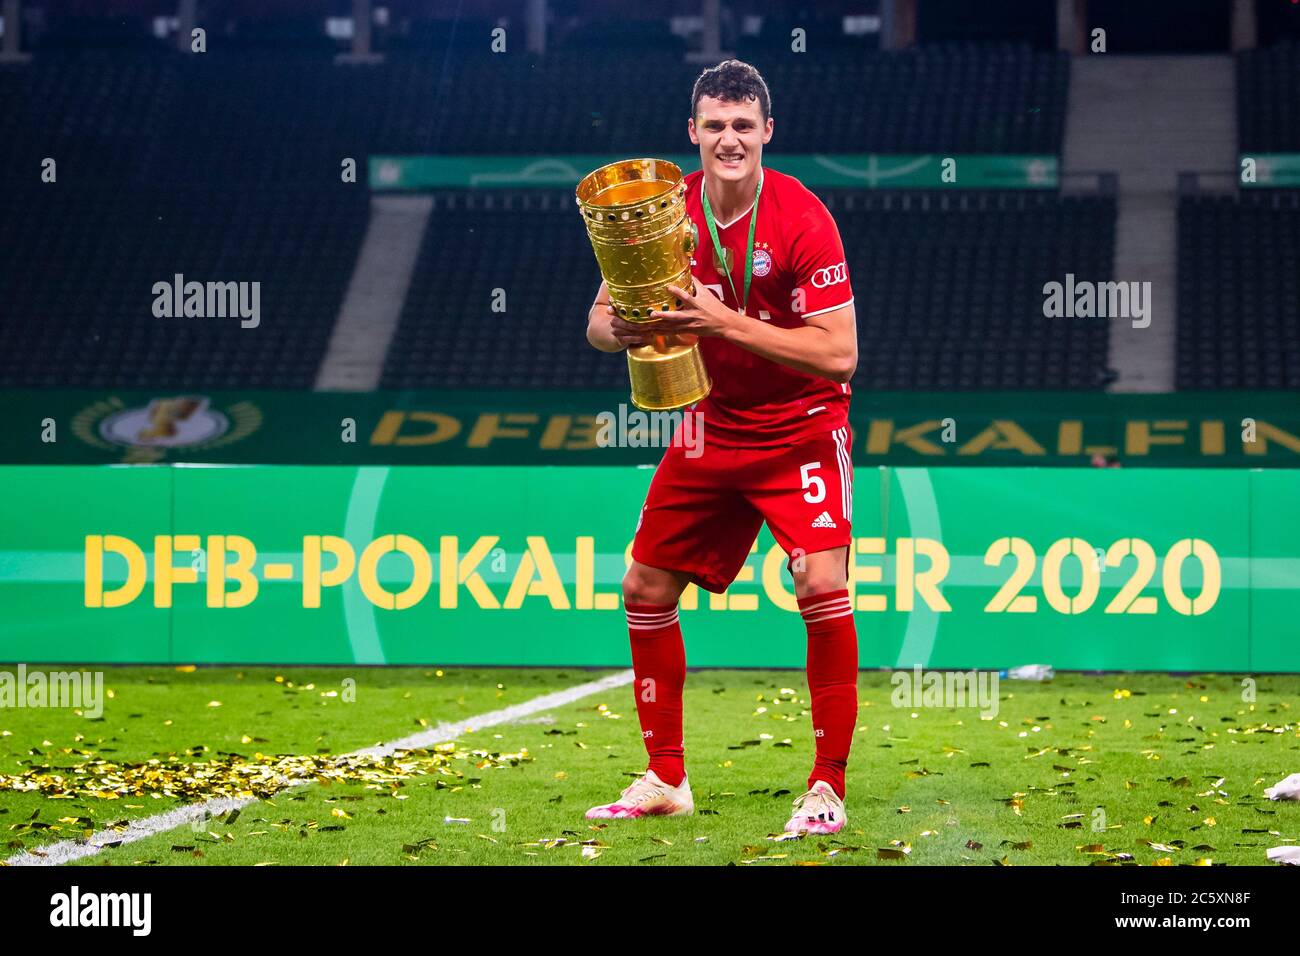 Berlin, Germany, 4 th July 2020,  Benjamin PAVARD, FCB 5   with trophy at the DFB Pokal Final match  FC BAYERN MUENCHEN - BAYER 04 LEVERKUSEN 4-2  in season 2019/2020 , FCB Foto: © Peter Schatz / Alamy Live News / Kevin Voigt/Jan Huebner/Pool   - DFB REGULATIONS PROHIBIT ANY USE OF PHOTOGRAPHS as IMAGE SEQUENCES and/or QUASI-VIDEO -  National and international News-Agencies OUT Editorial Use ONLY Stock Photo